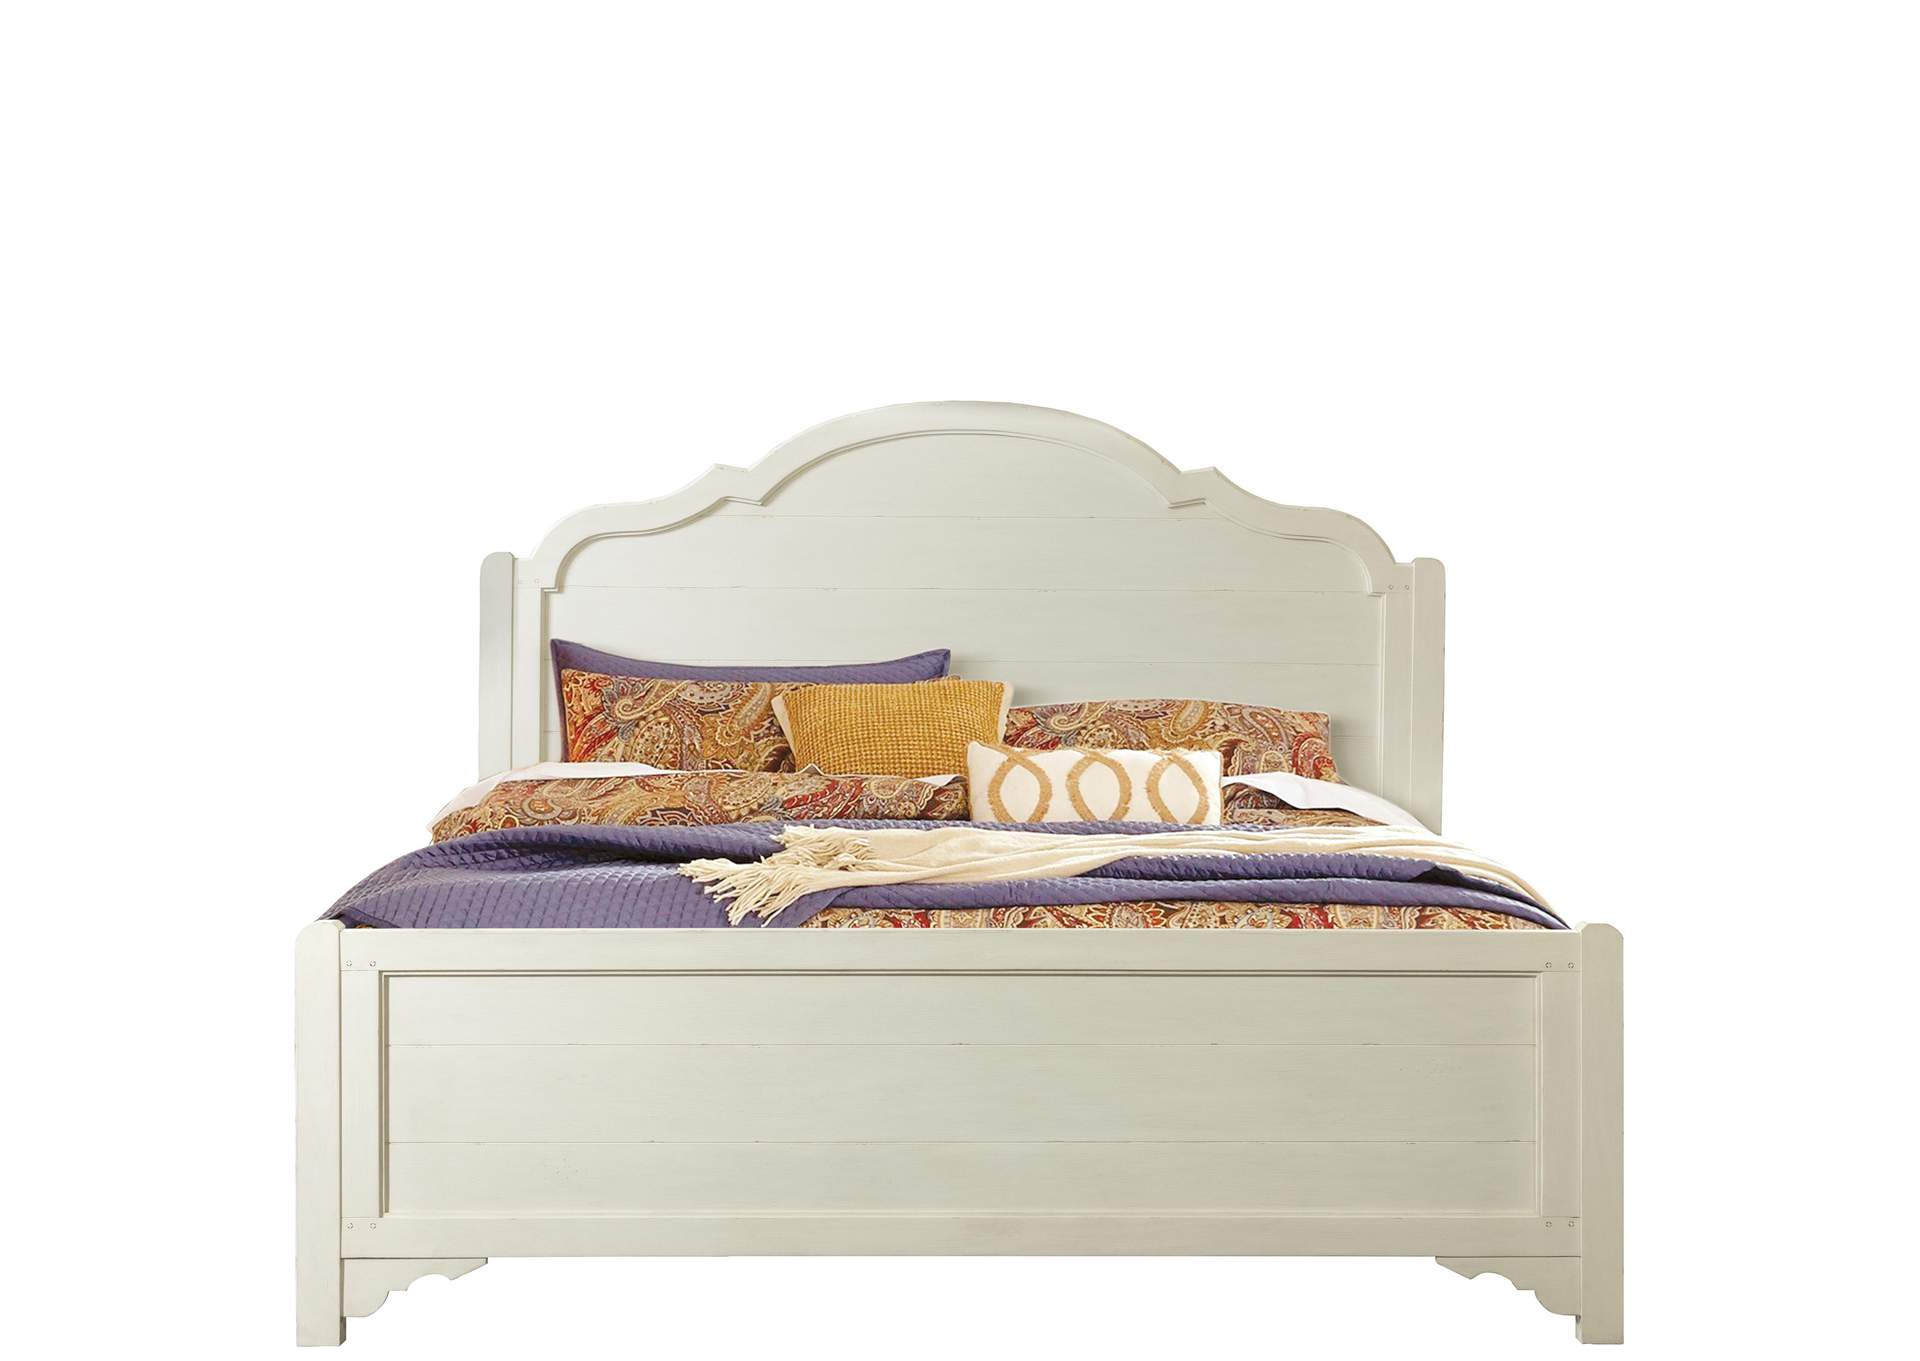 Grand Haven Feathered White Panel King Bed,Riverside